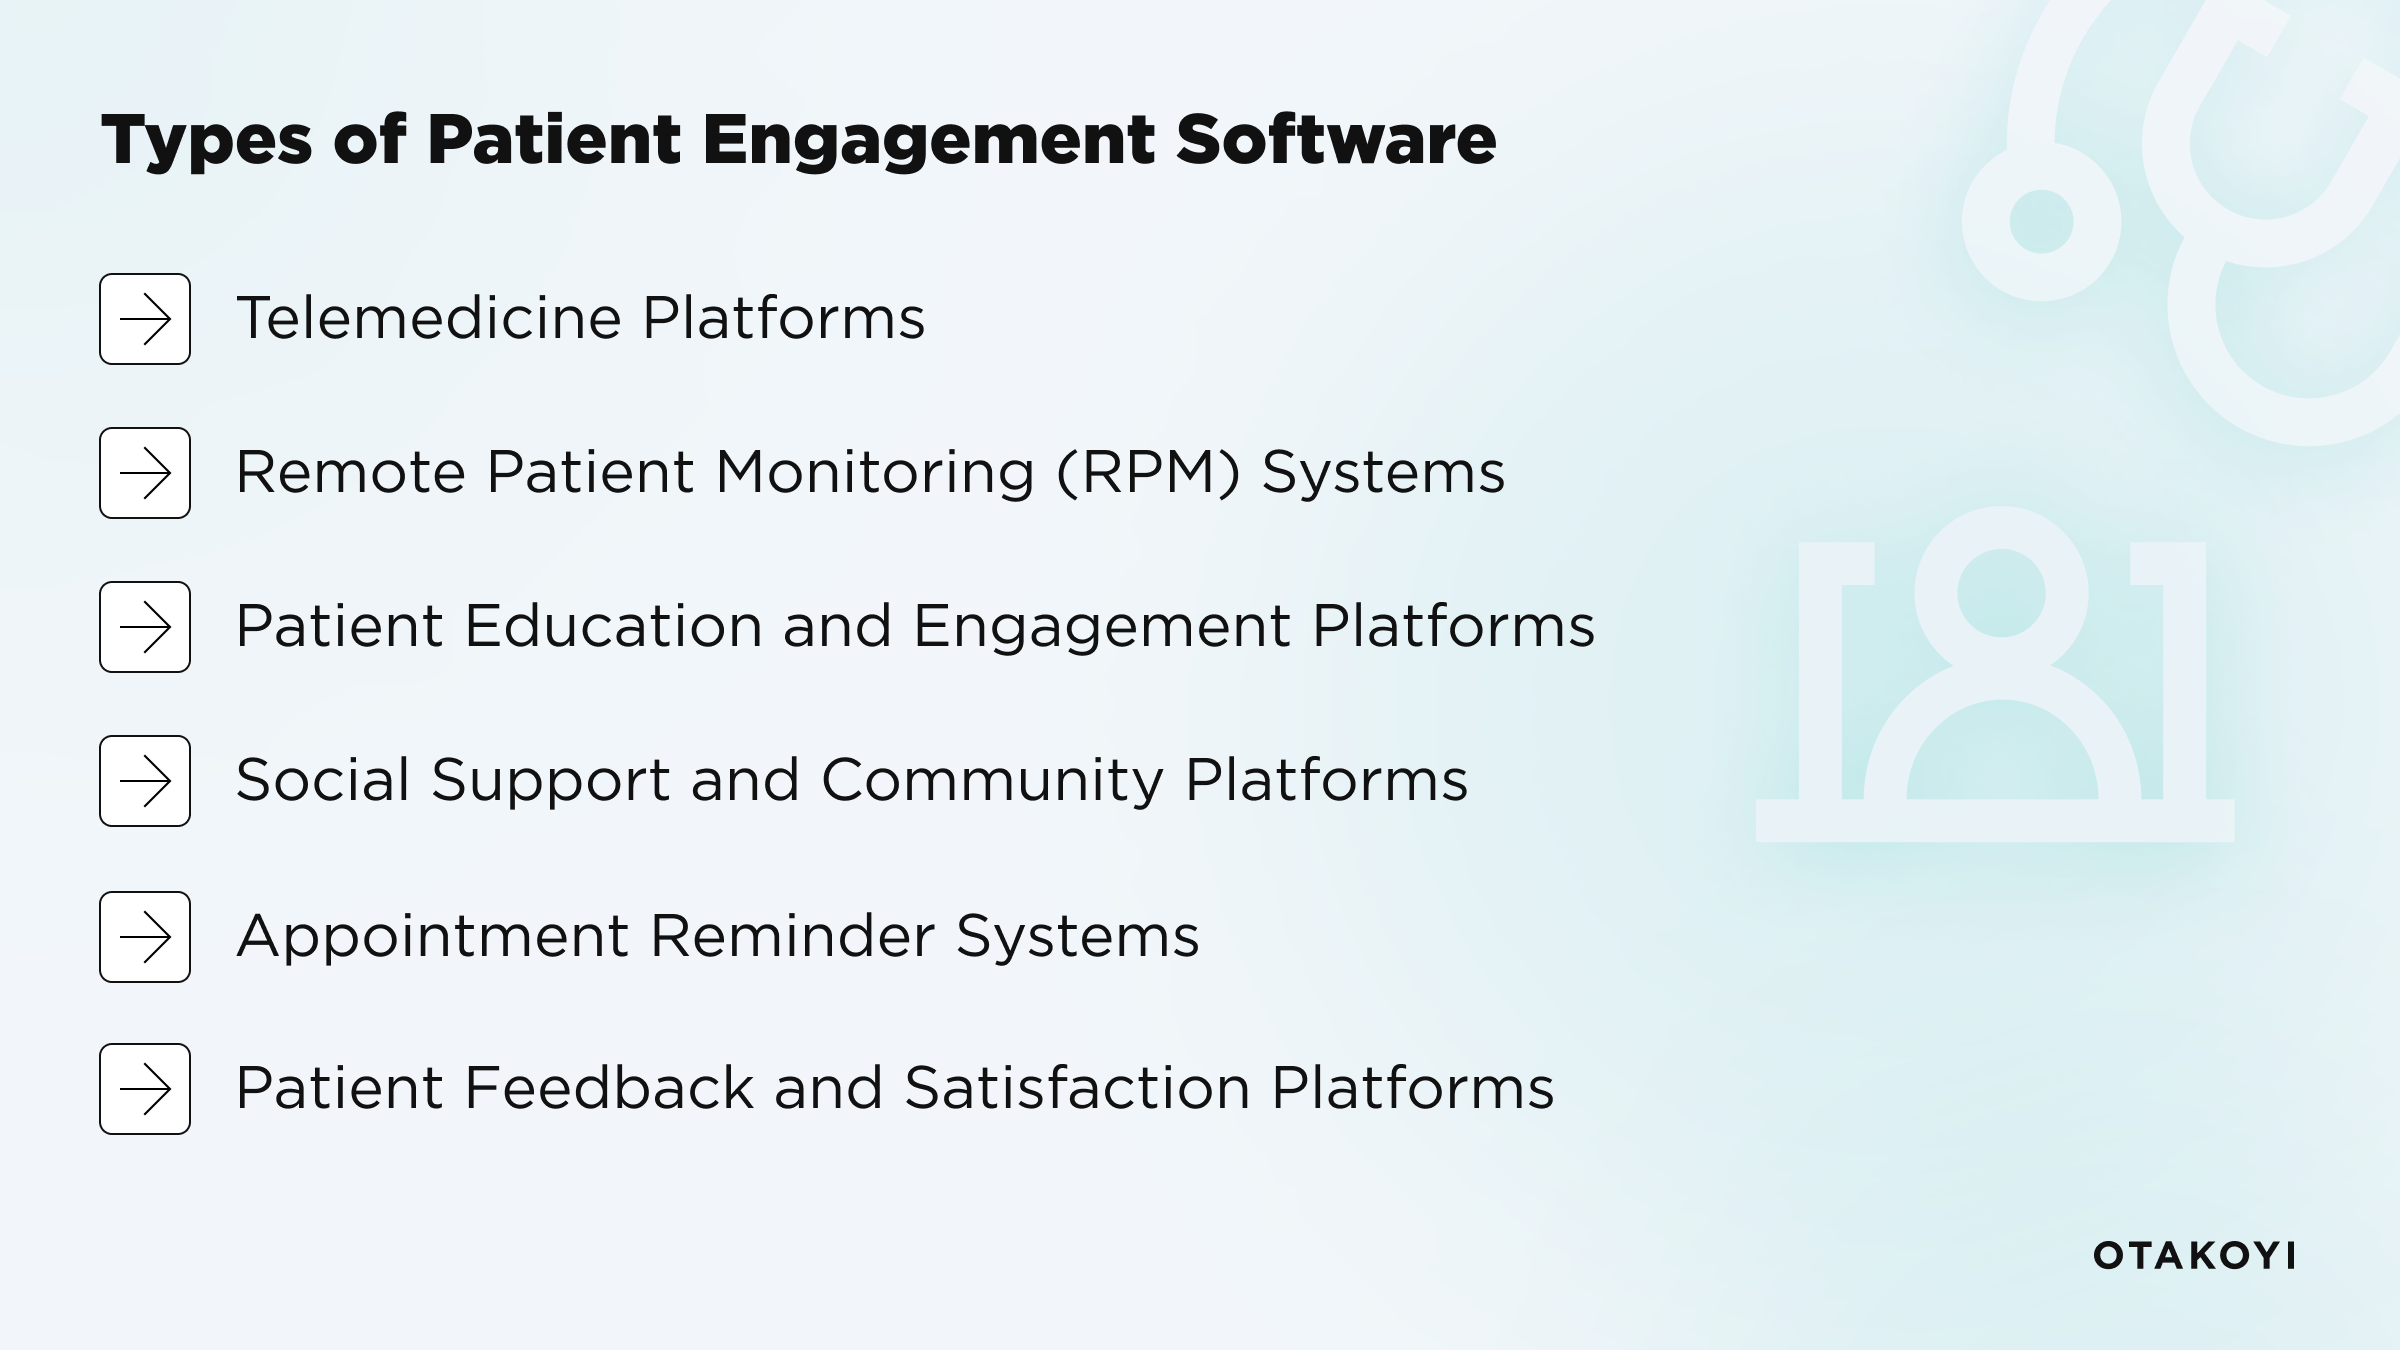 Types of Patient Engagement Software